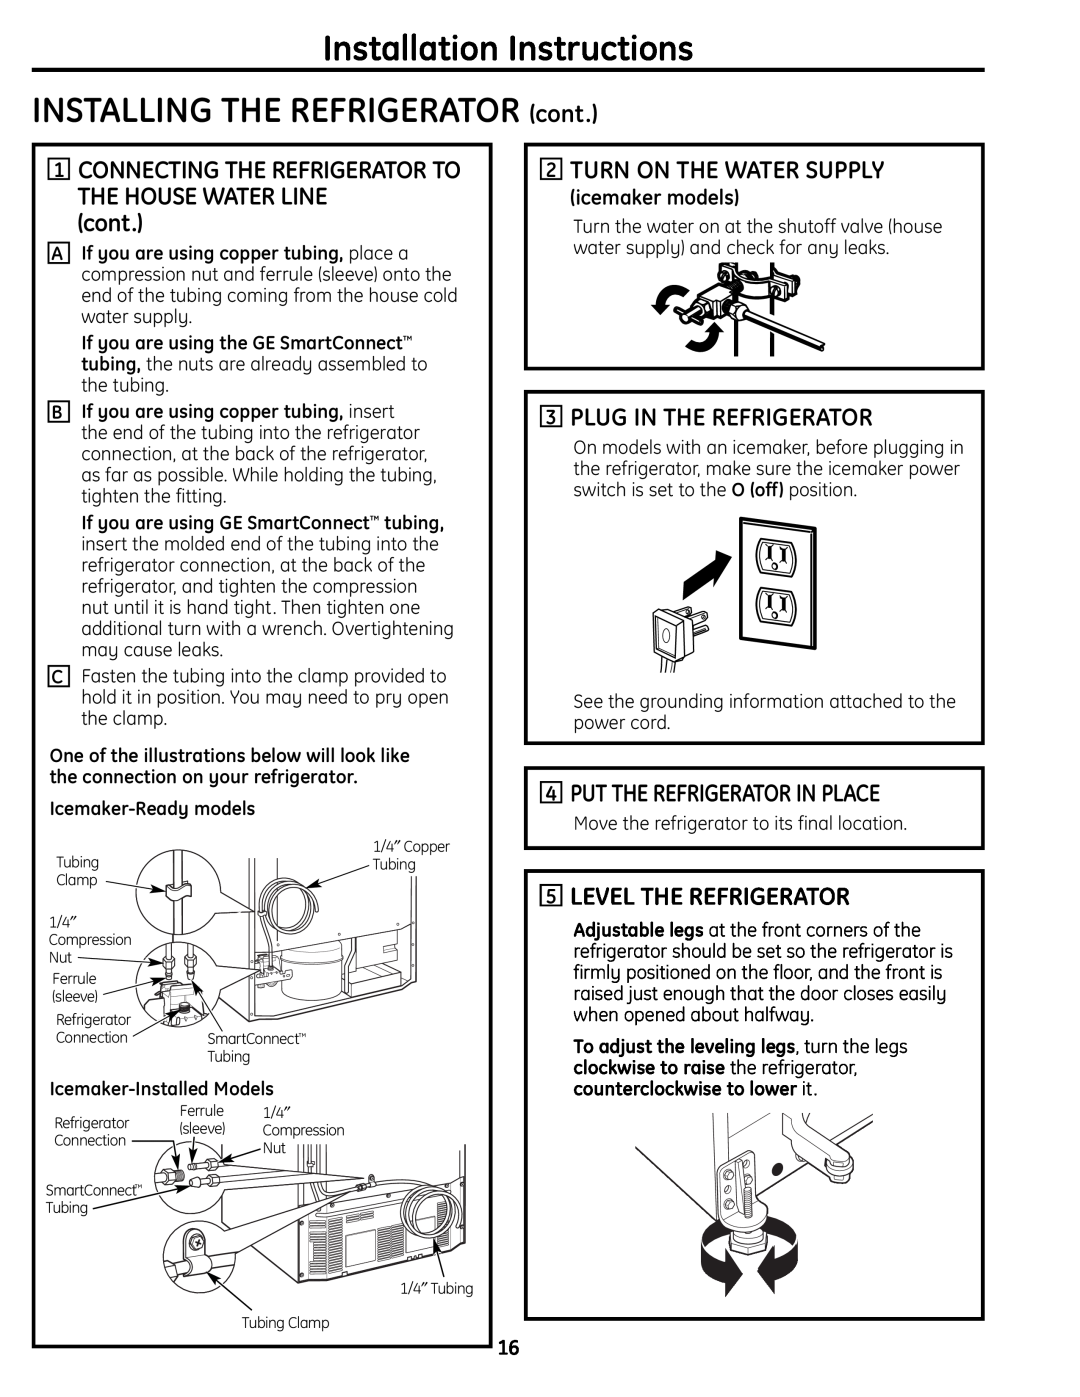 GE 200D9366P004 Installation Instructions INSTALLING THE REFRIGERATOR cont, Turn On The Water Supply, icemaker models 